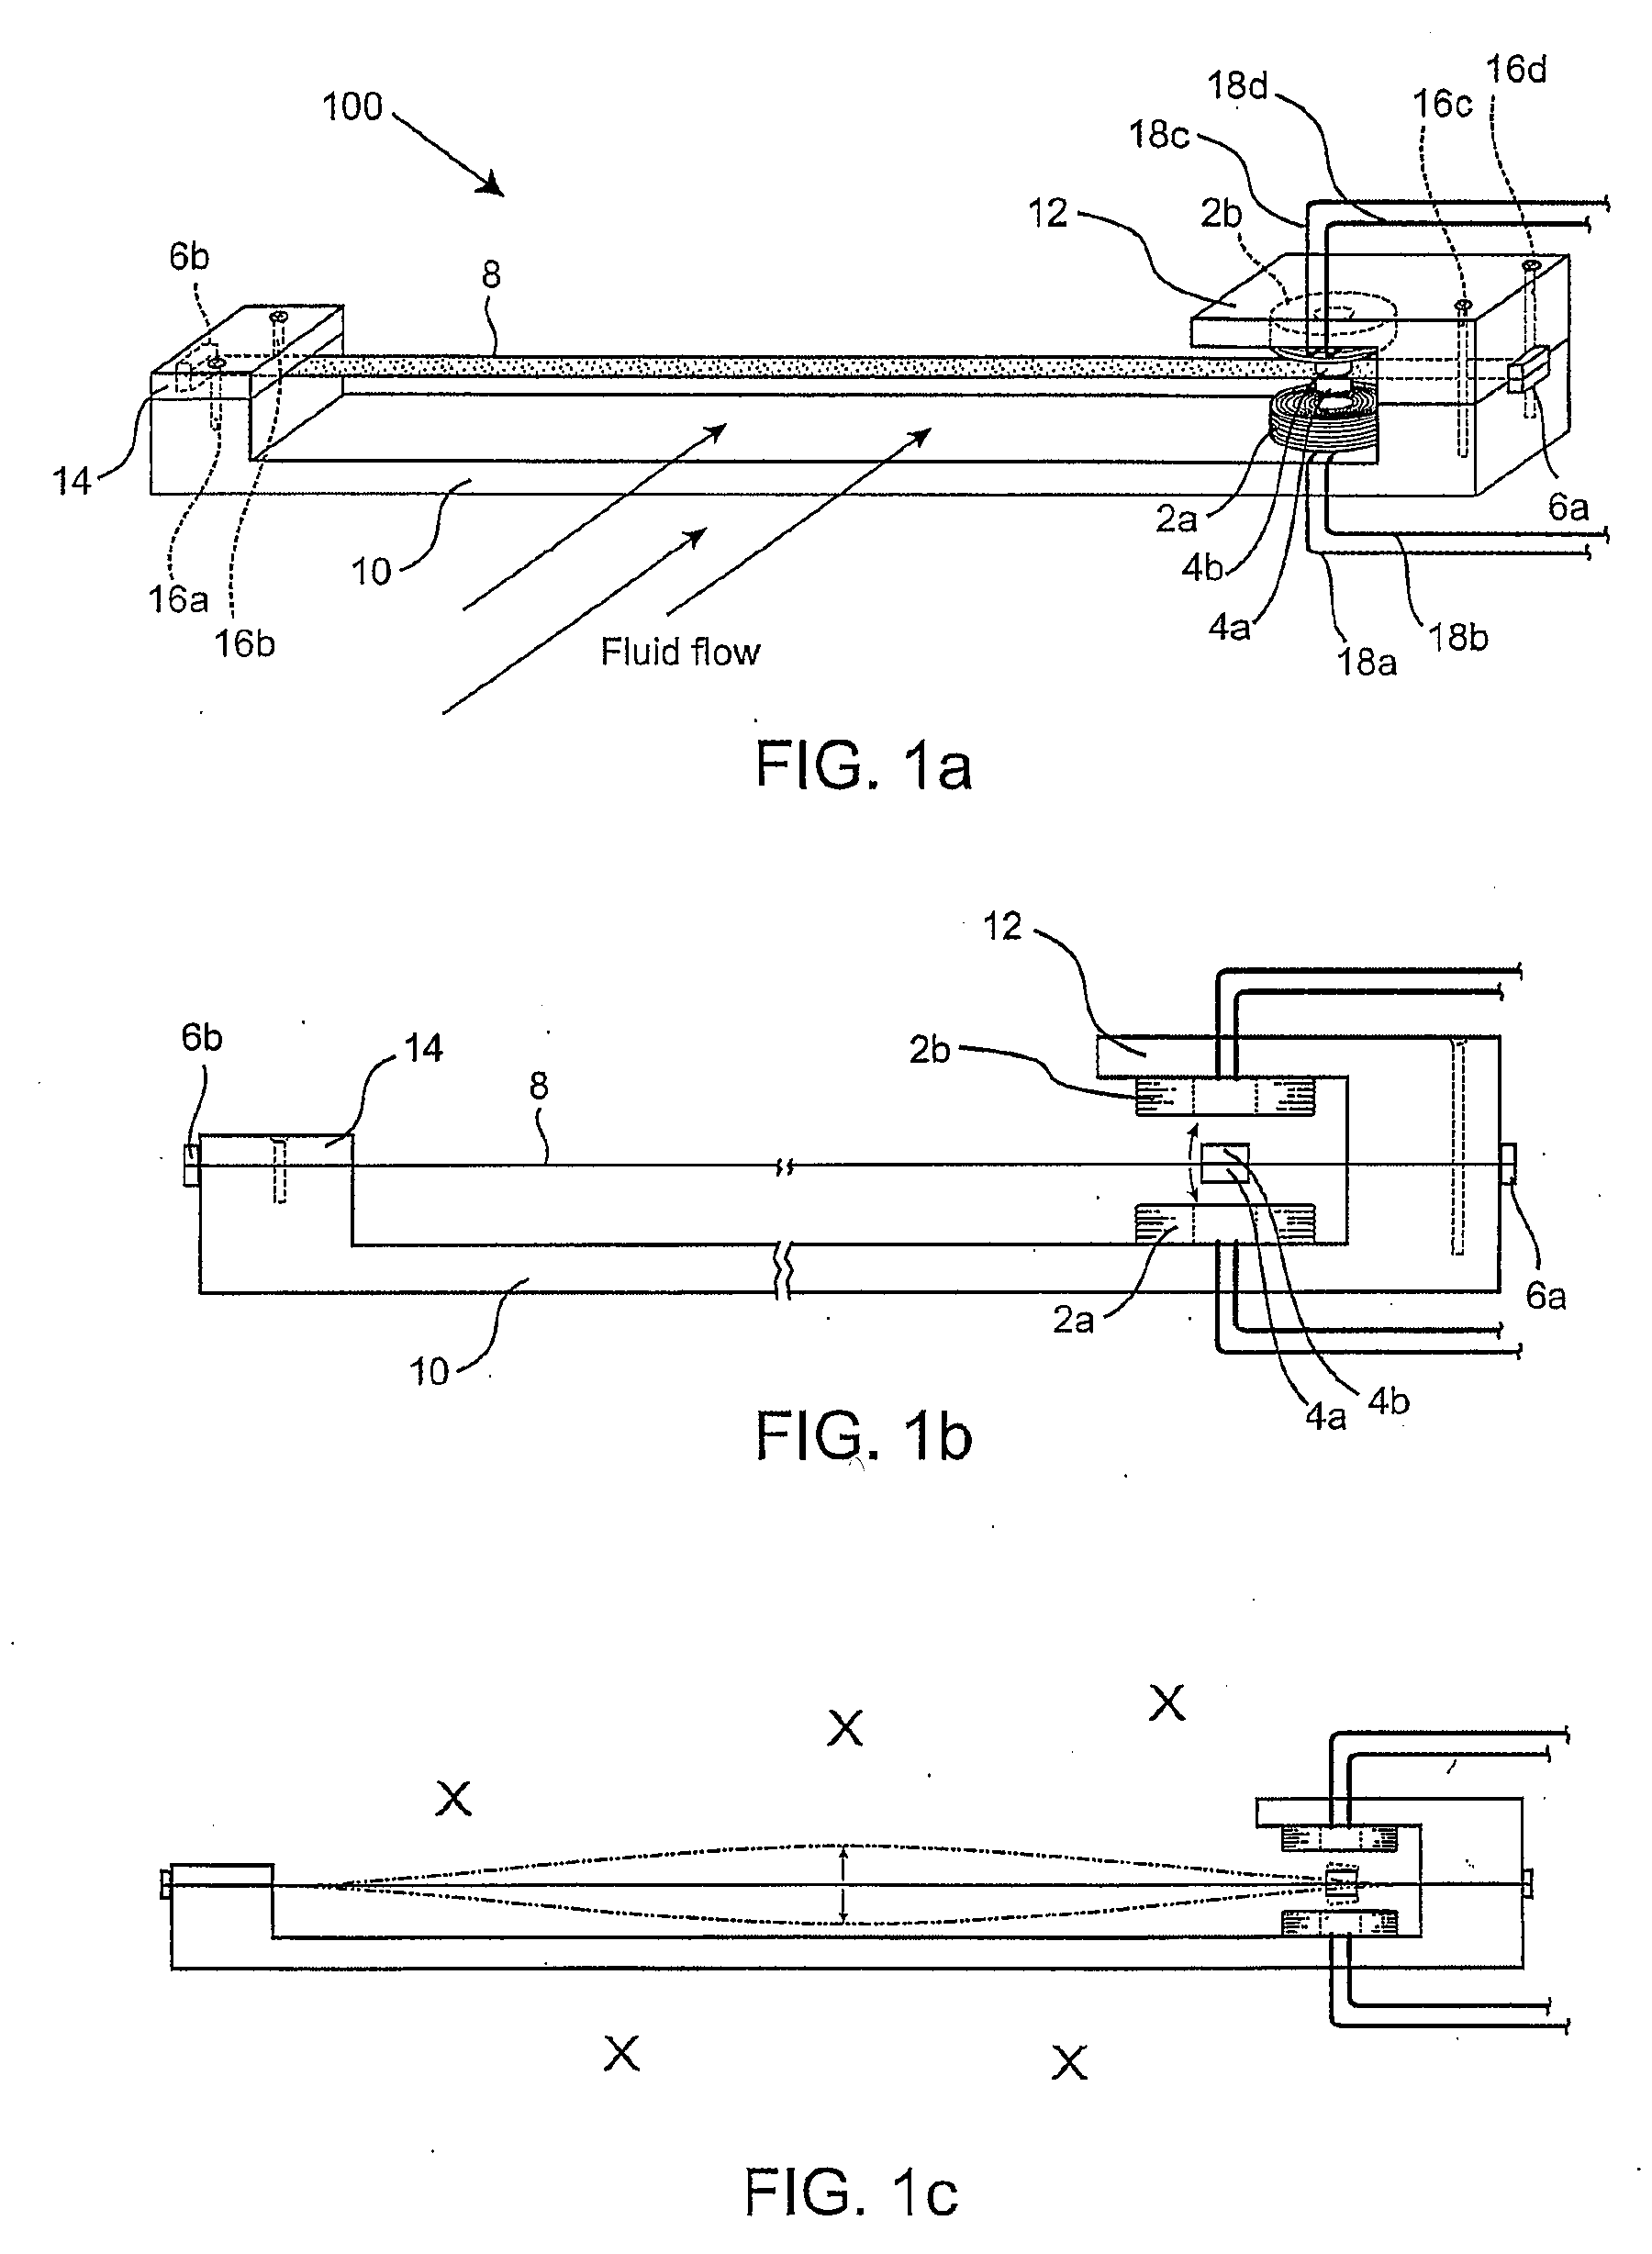 Fluid-induced energy converter with curved parts